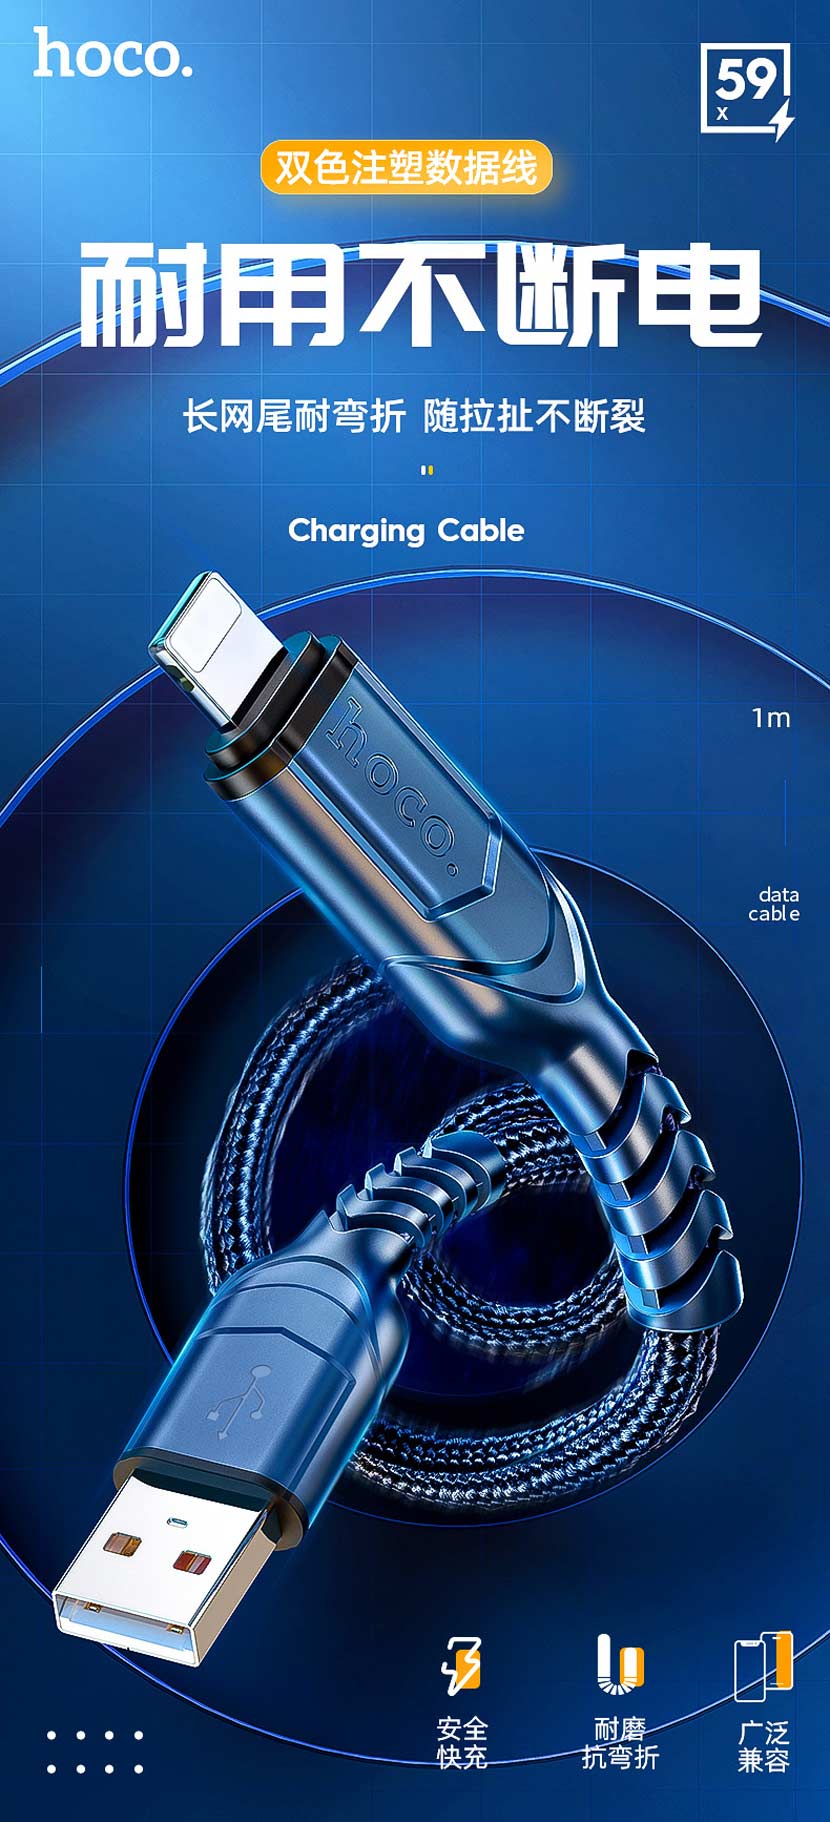 hoco news x59 victory charging data cable cn